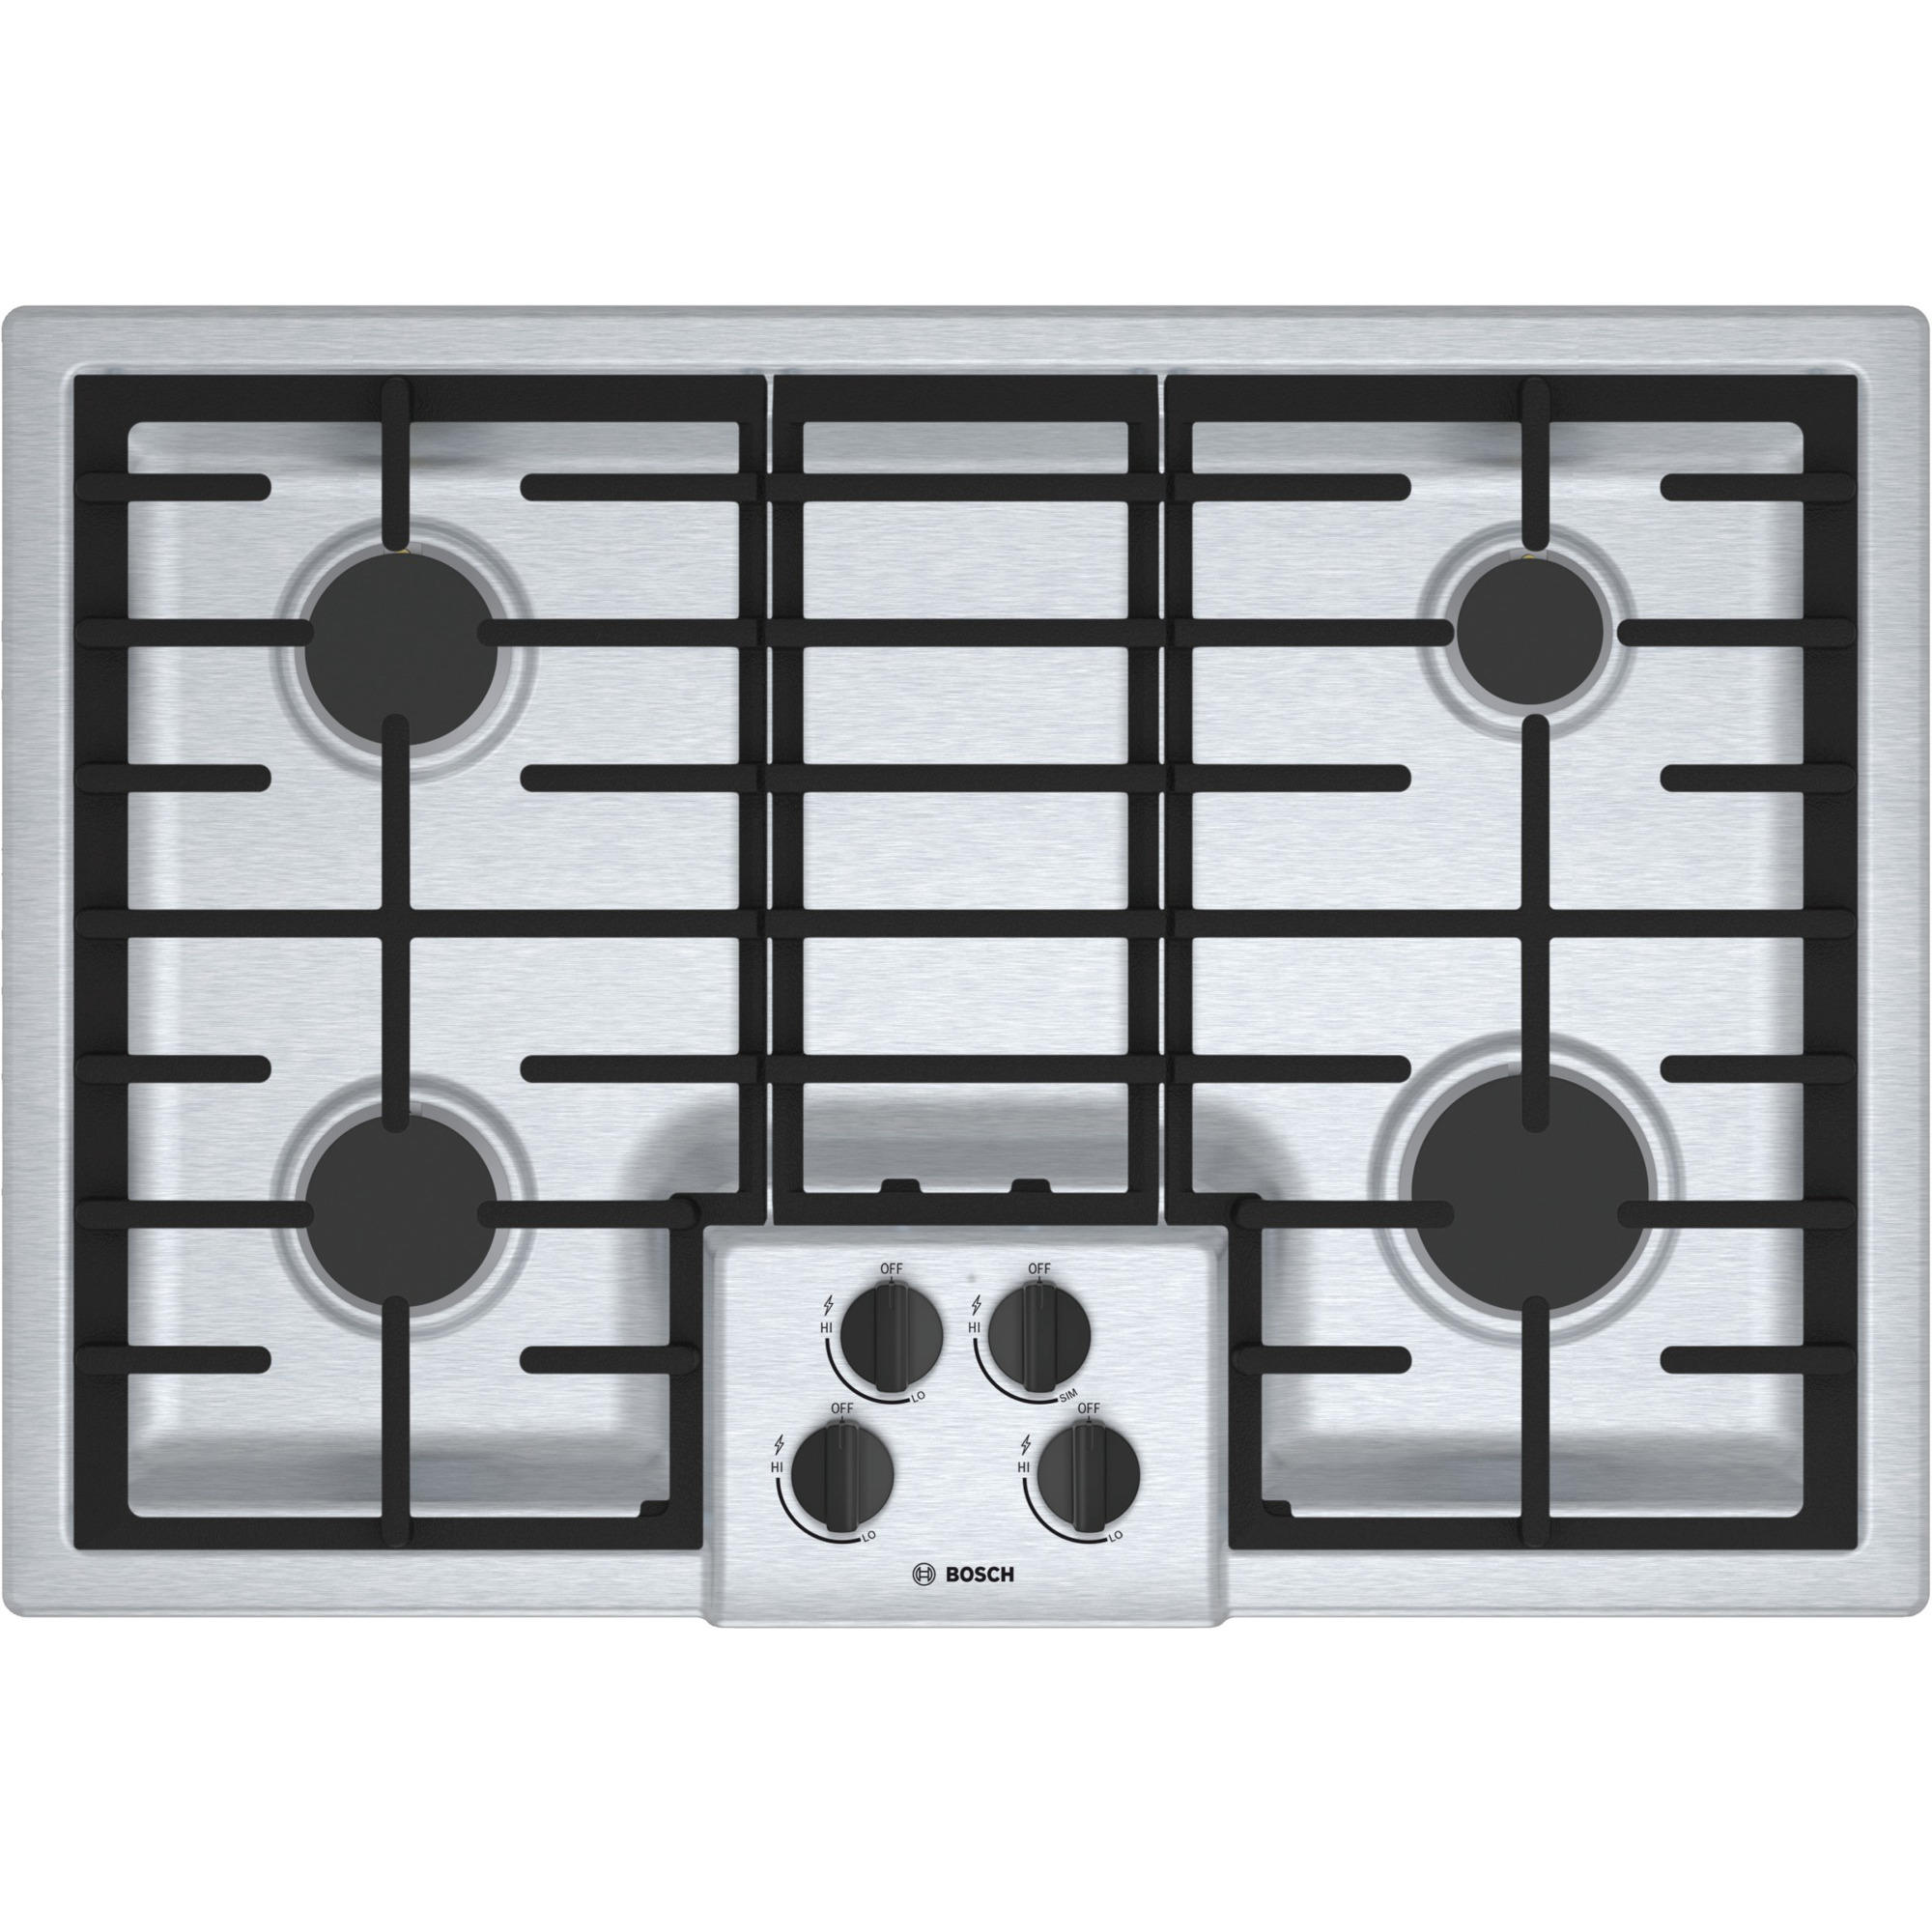 0825225906858 - NGM5055UC 30 500 SERIES GAS COOKTOP - STAINLESS STEEL